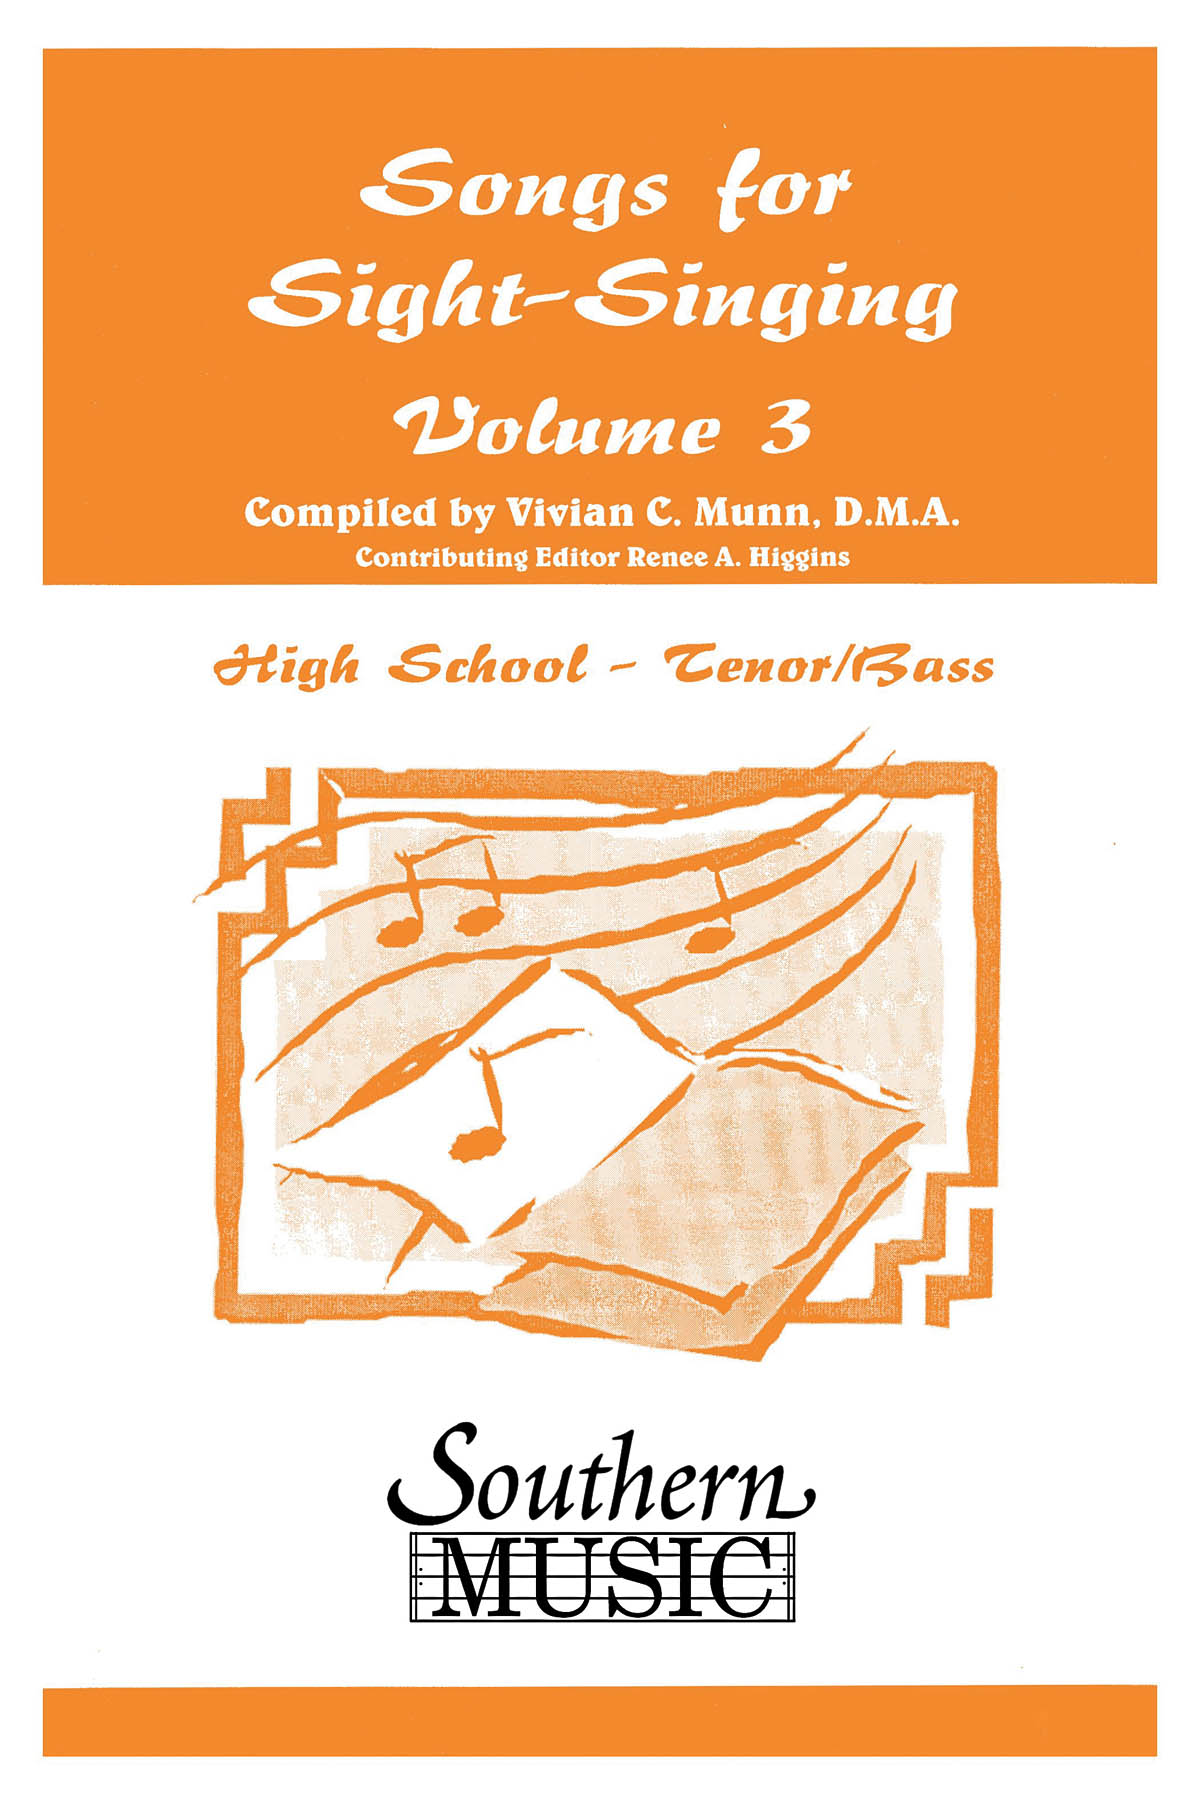 Bobby Siltman: Songs for Sight Singing¡- Volume 3: Lower Voices a Cappella: